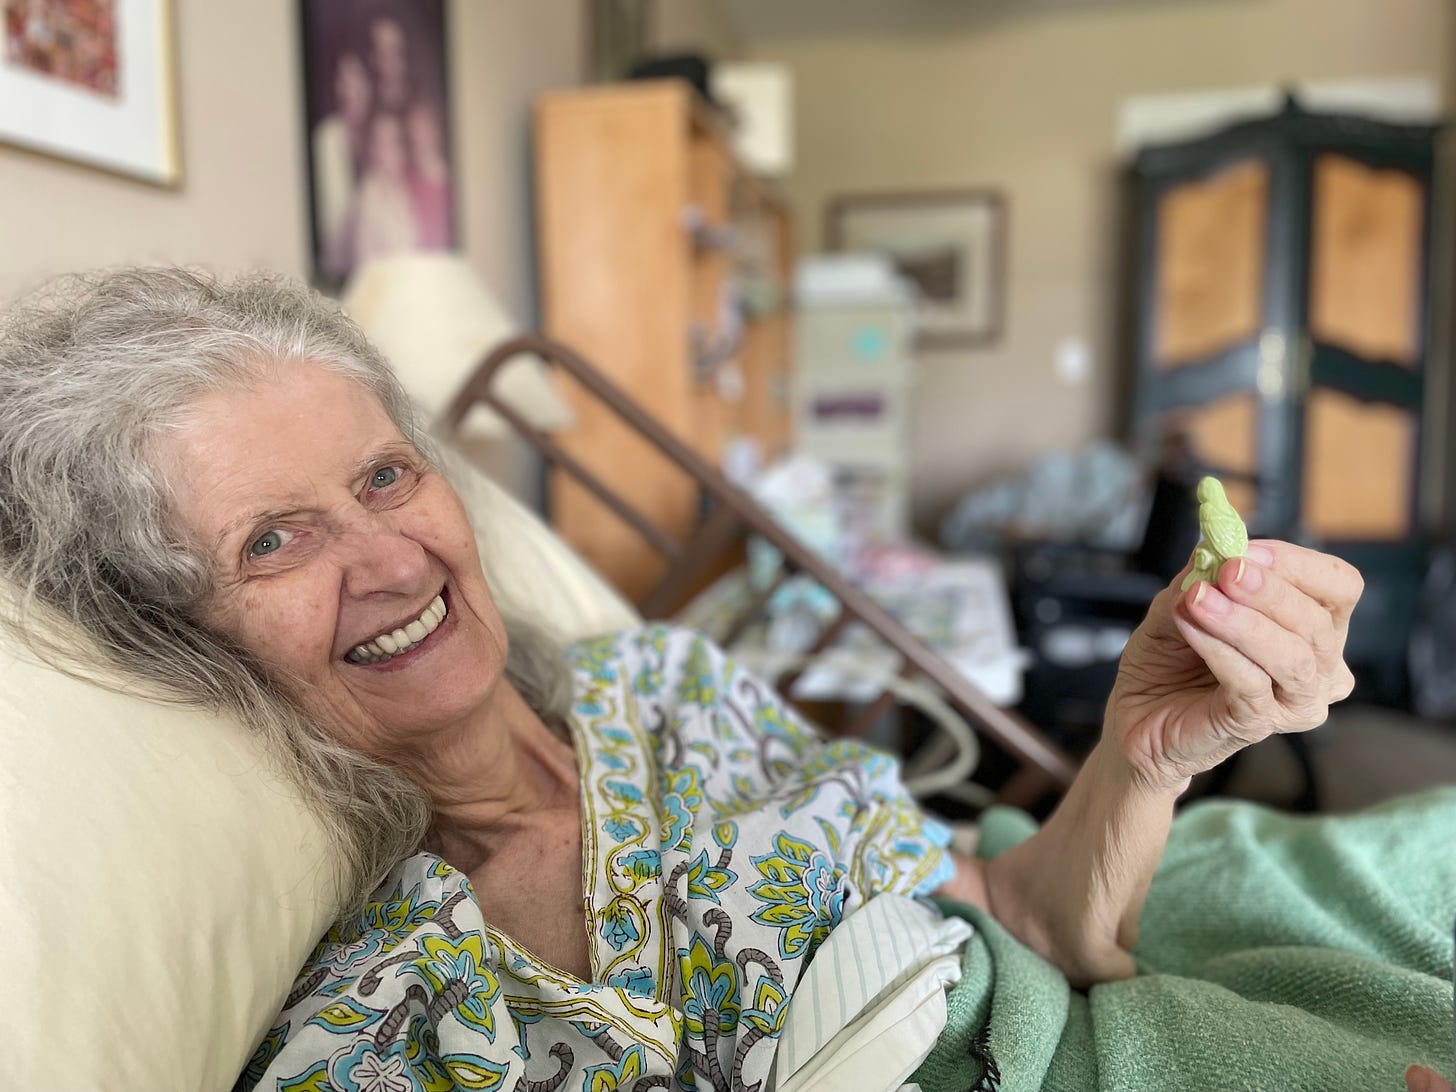 My mom lying at home in a hospital bed and holding a porcelain bird